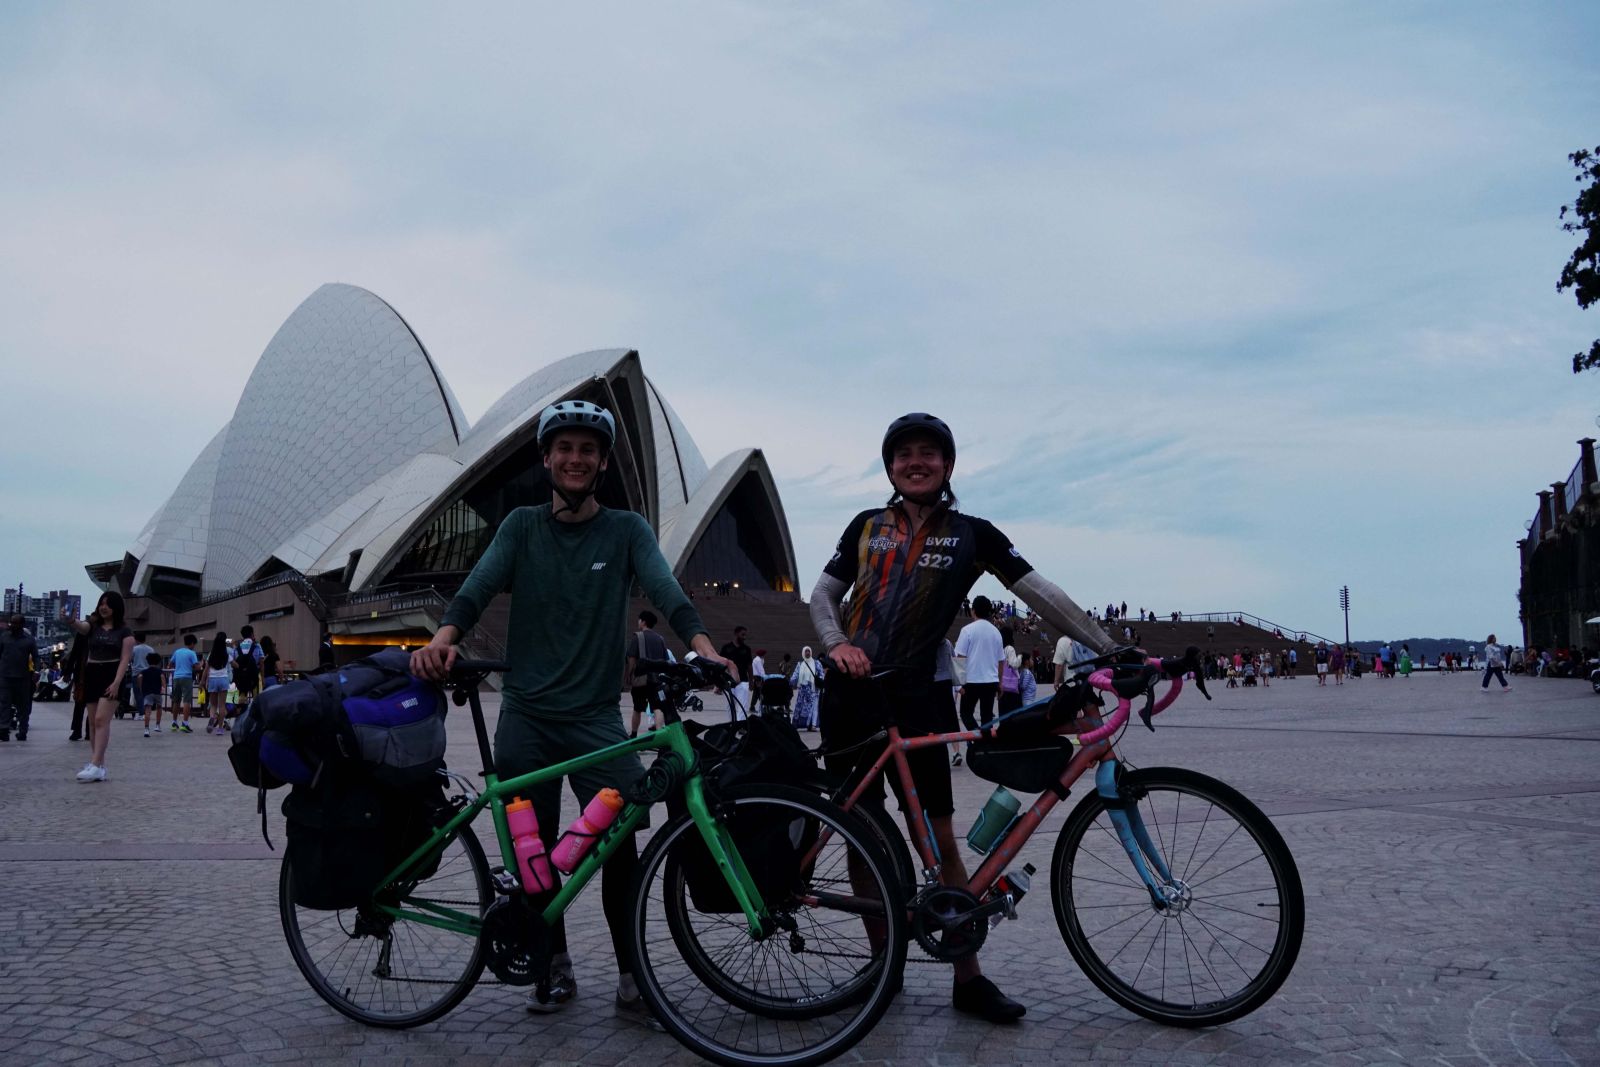 James and Reid in front of the Sydney Opera House with their bikes